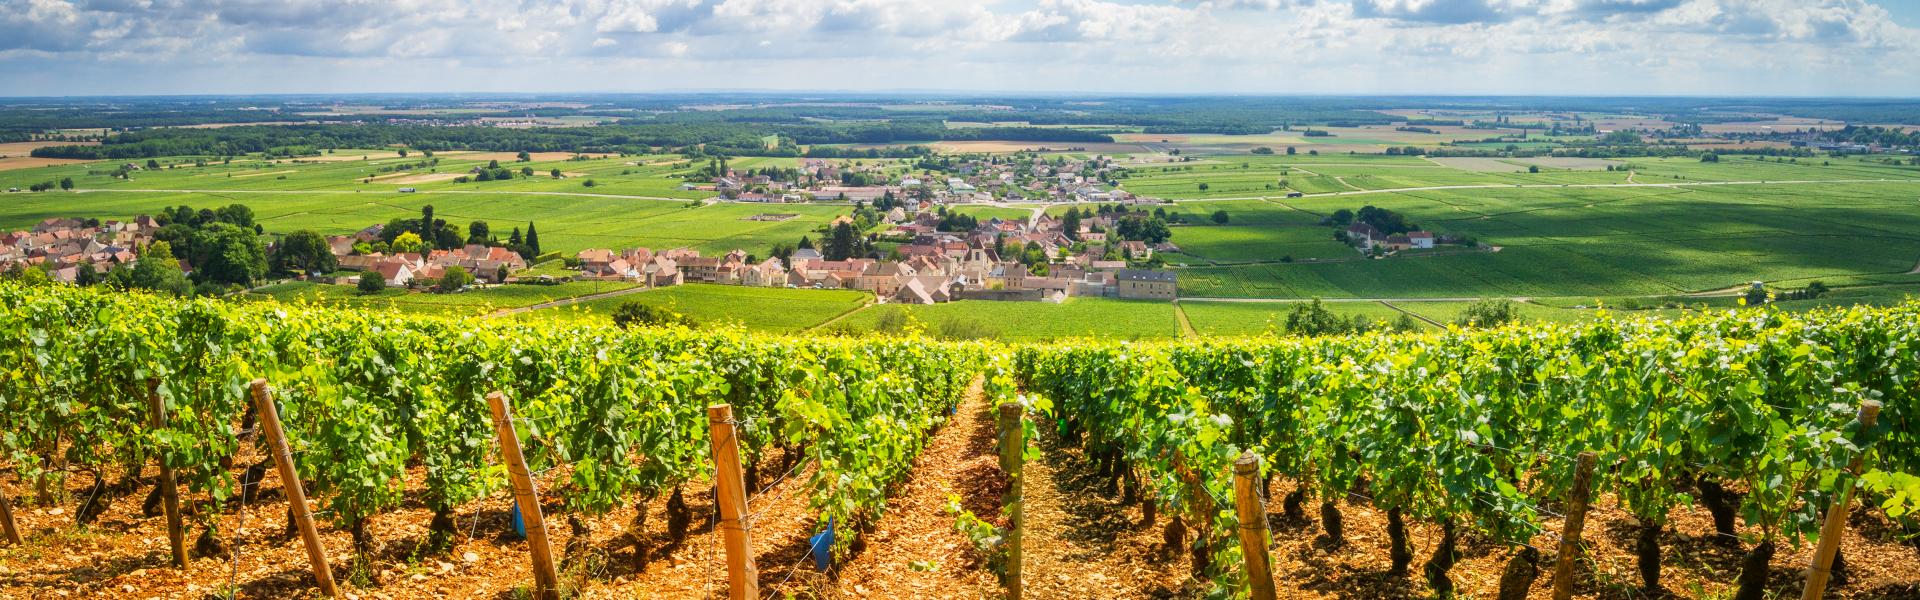 Find the perfect accommodation for your holiday in Burgundy - Casamundo